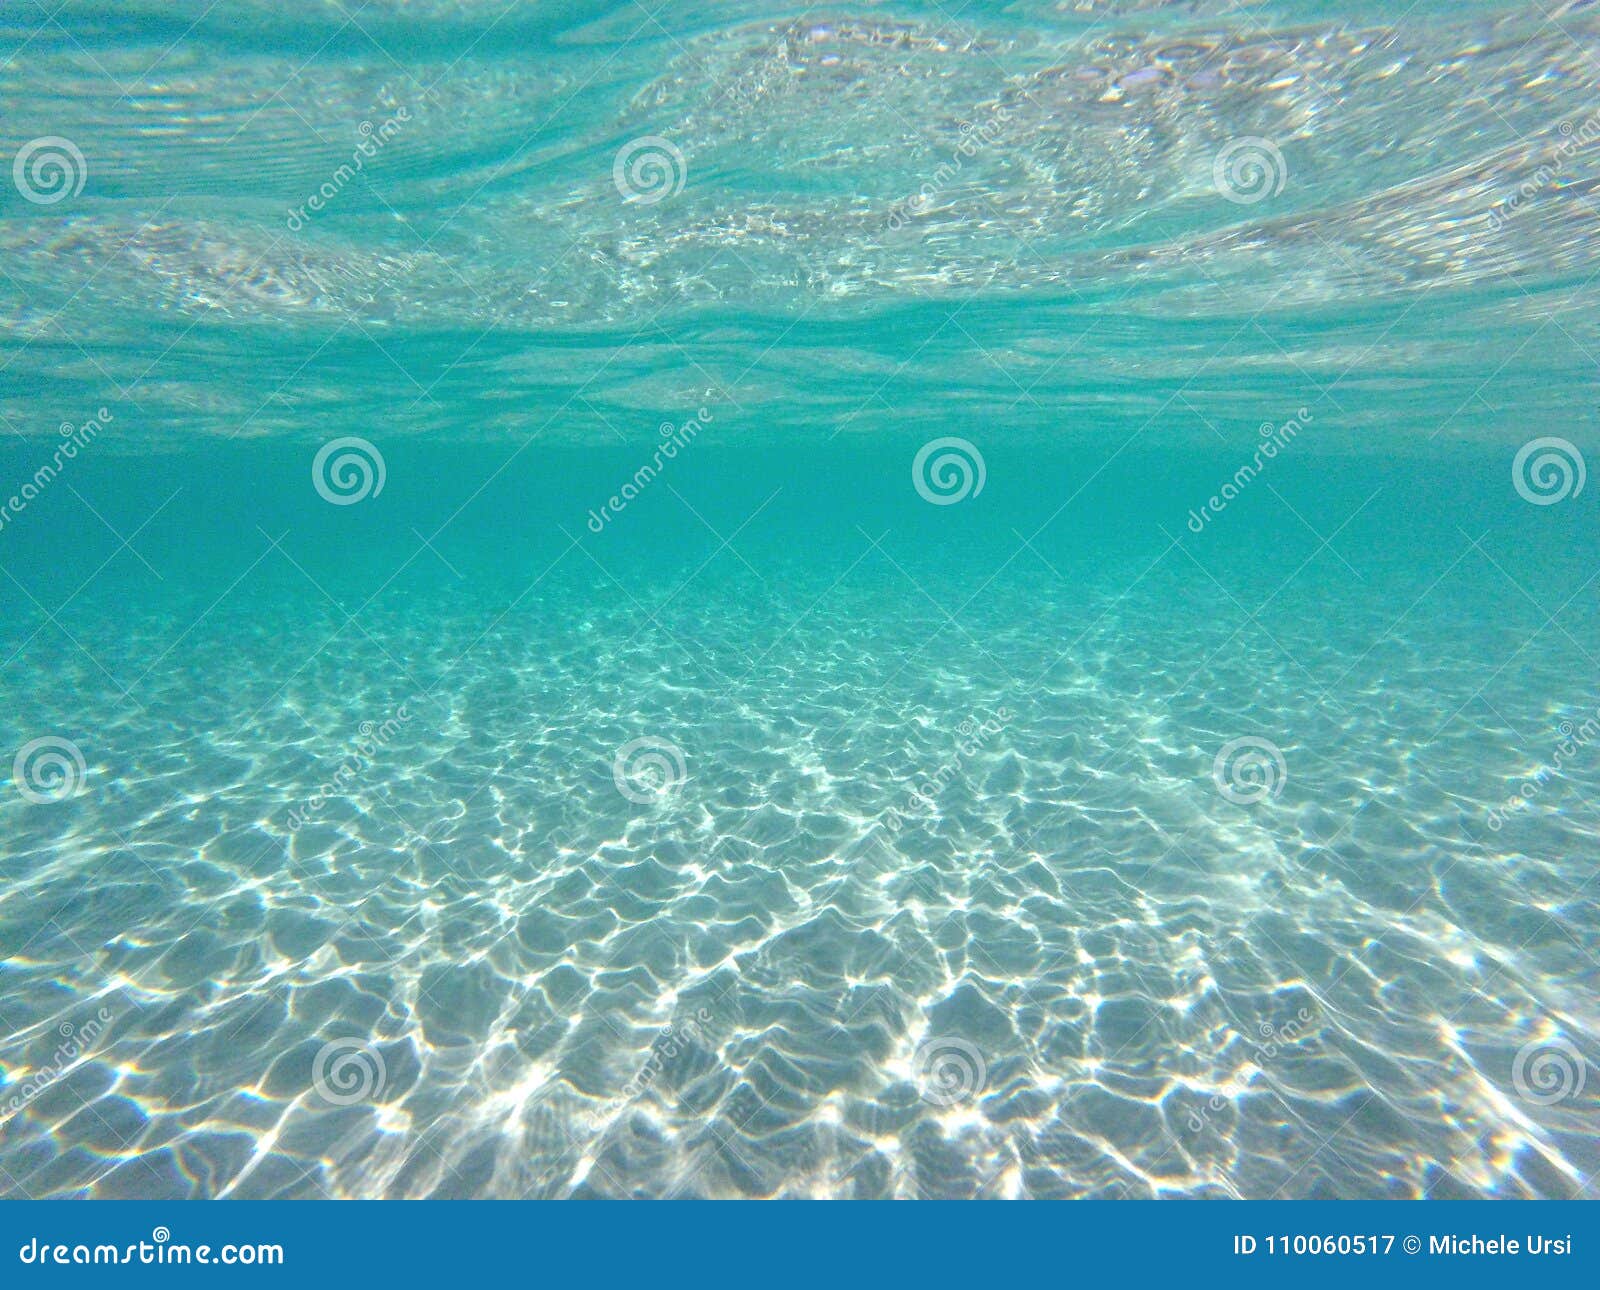 Wonderful Crystal Clear Water Stock Image Image Of South Ocean